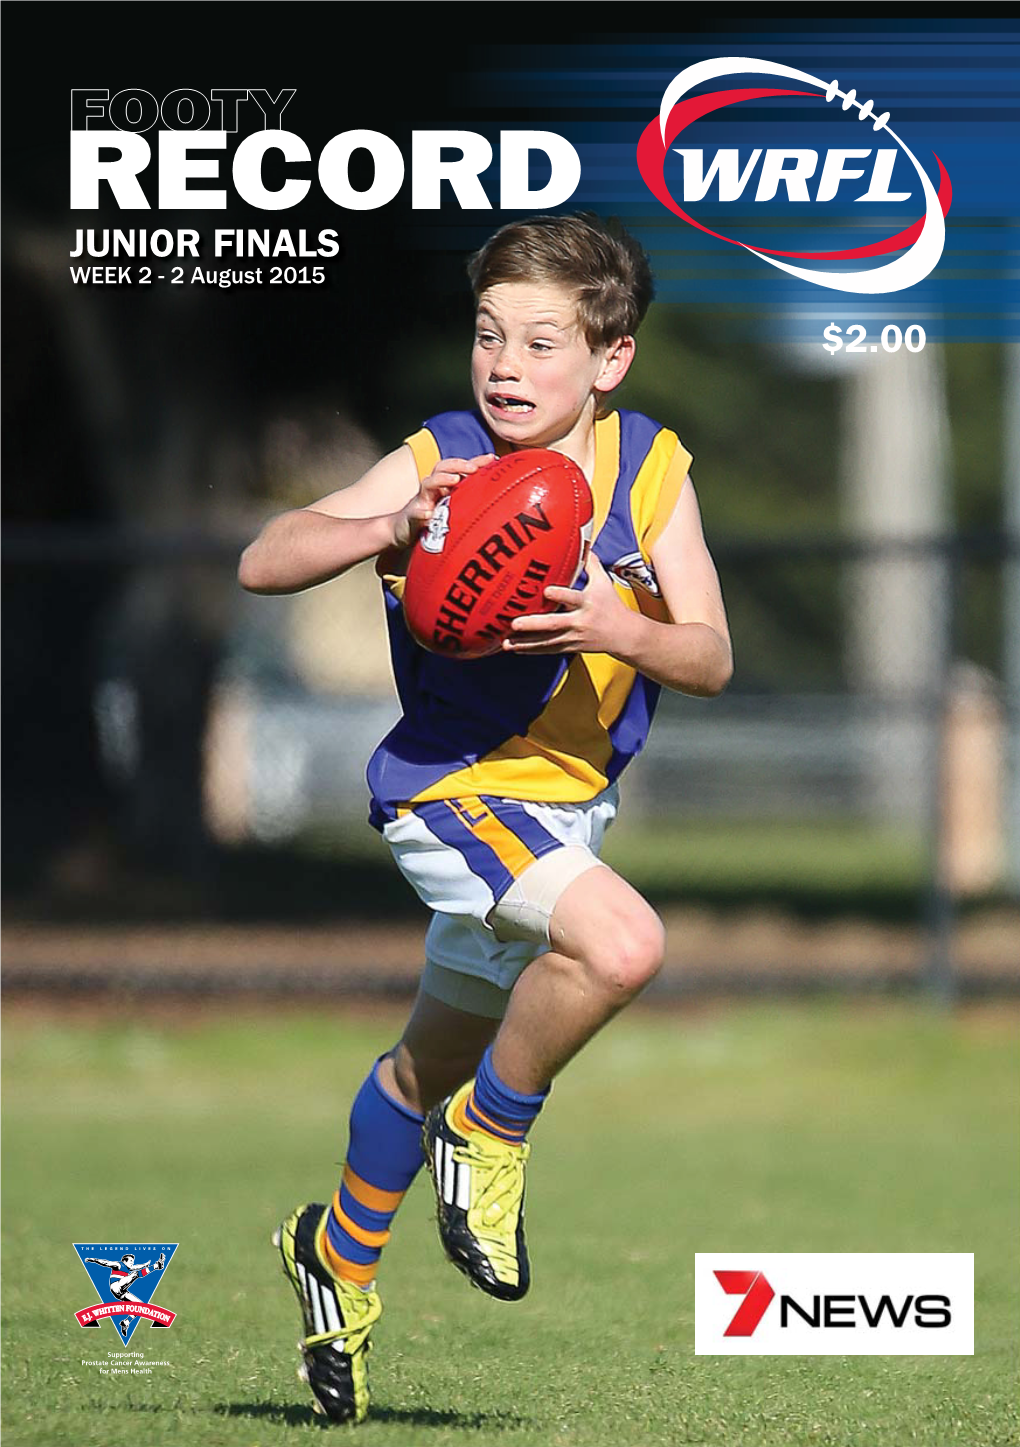 JUNIOR FINALS WEEK 2 - 2 August 2015 $2.00 PROUD SUPPORTERS of the SPORTSMANSHIP IS the WINNER by Kirstie Fitzgerald